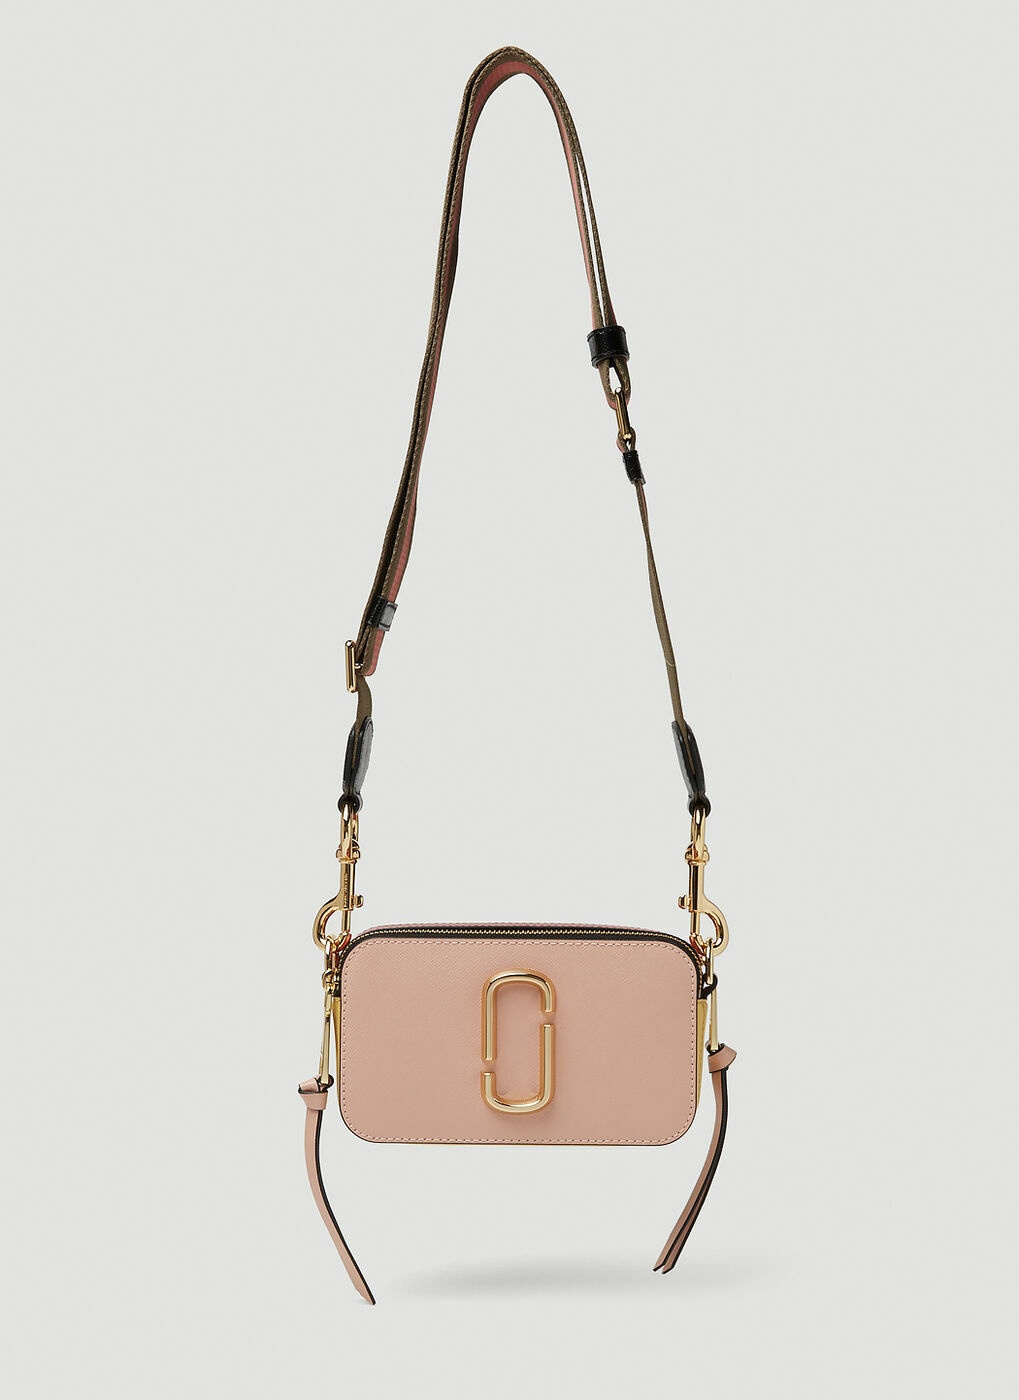 Marc Jacobs The Snapshot Bag in Candy Pink Multi